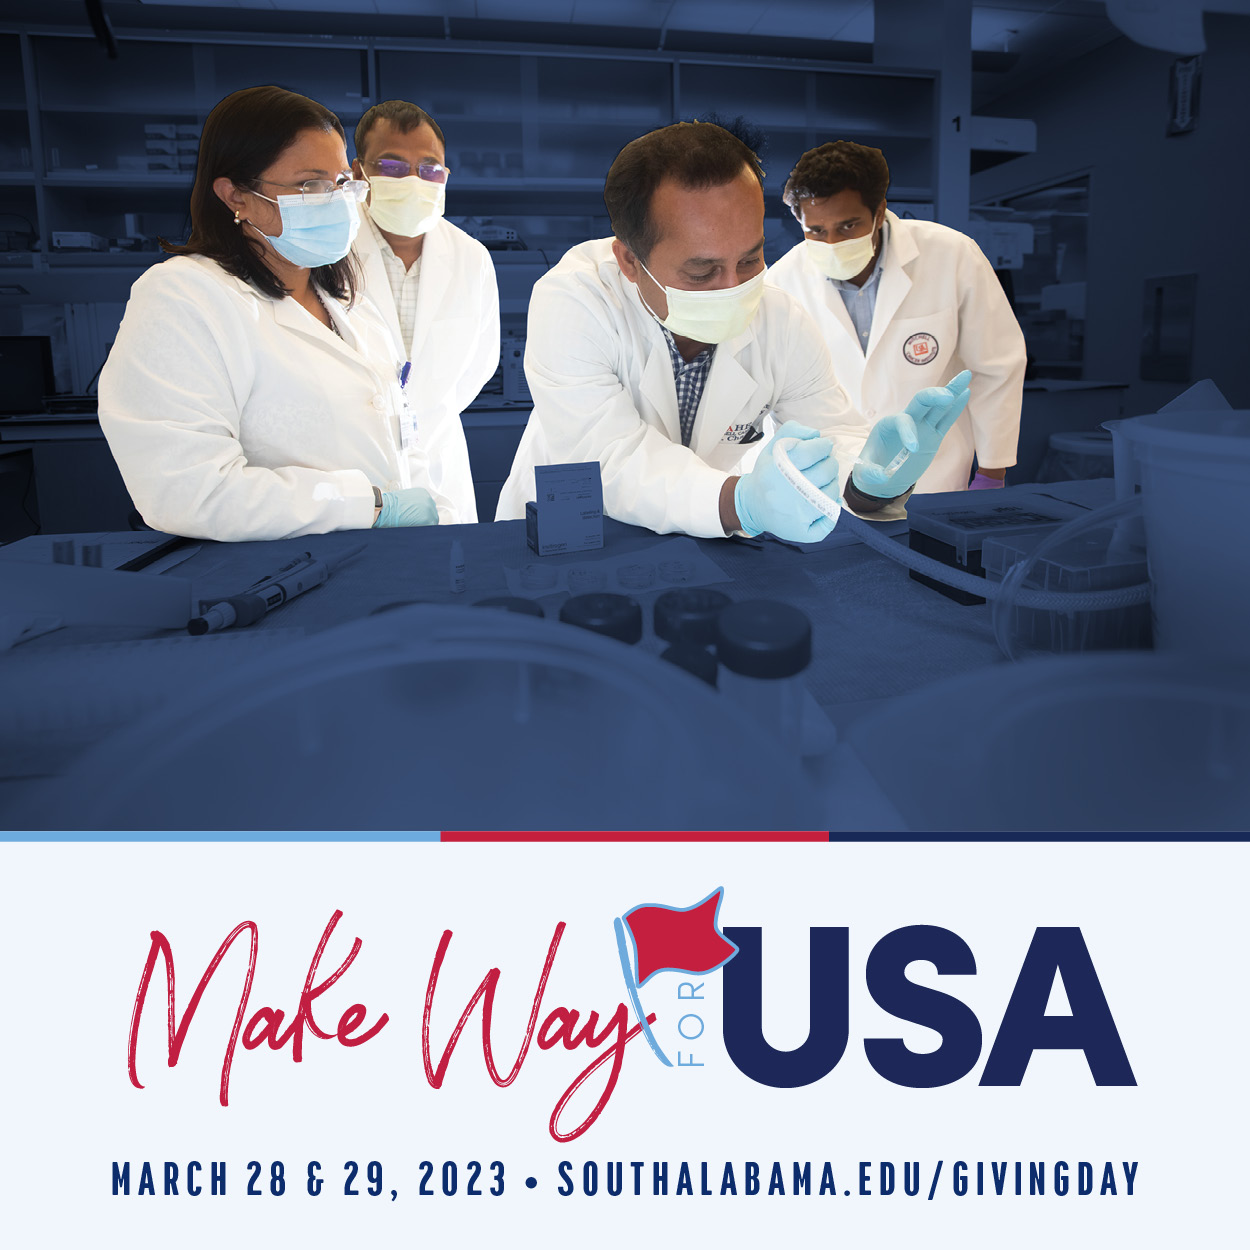 Make Way for USA March 28 and 29, 2023 Southalabama.edu/givingday with image of researchers working in a lab.